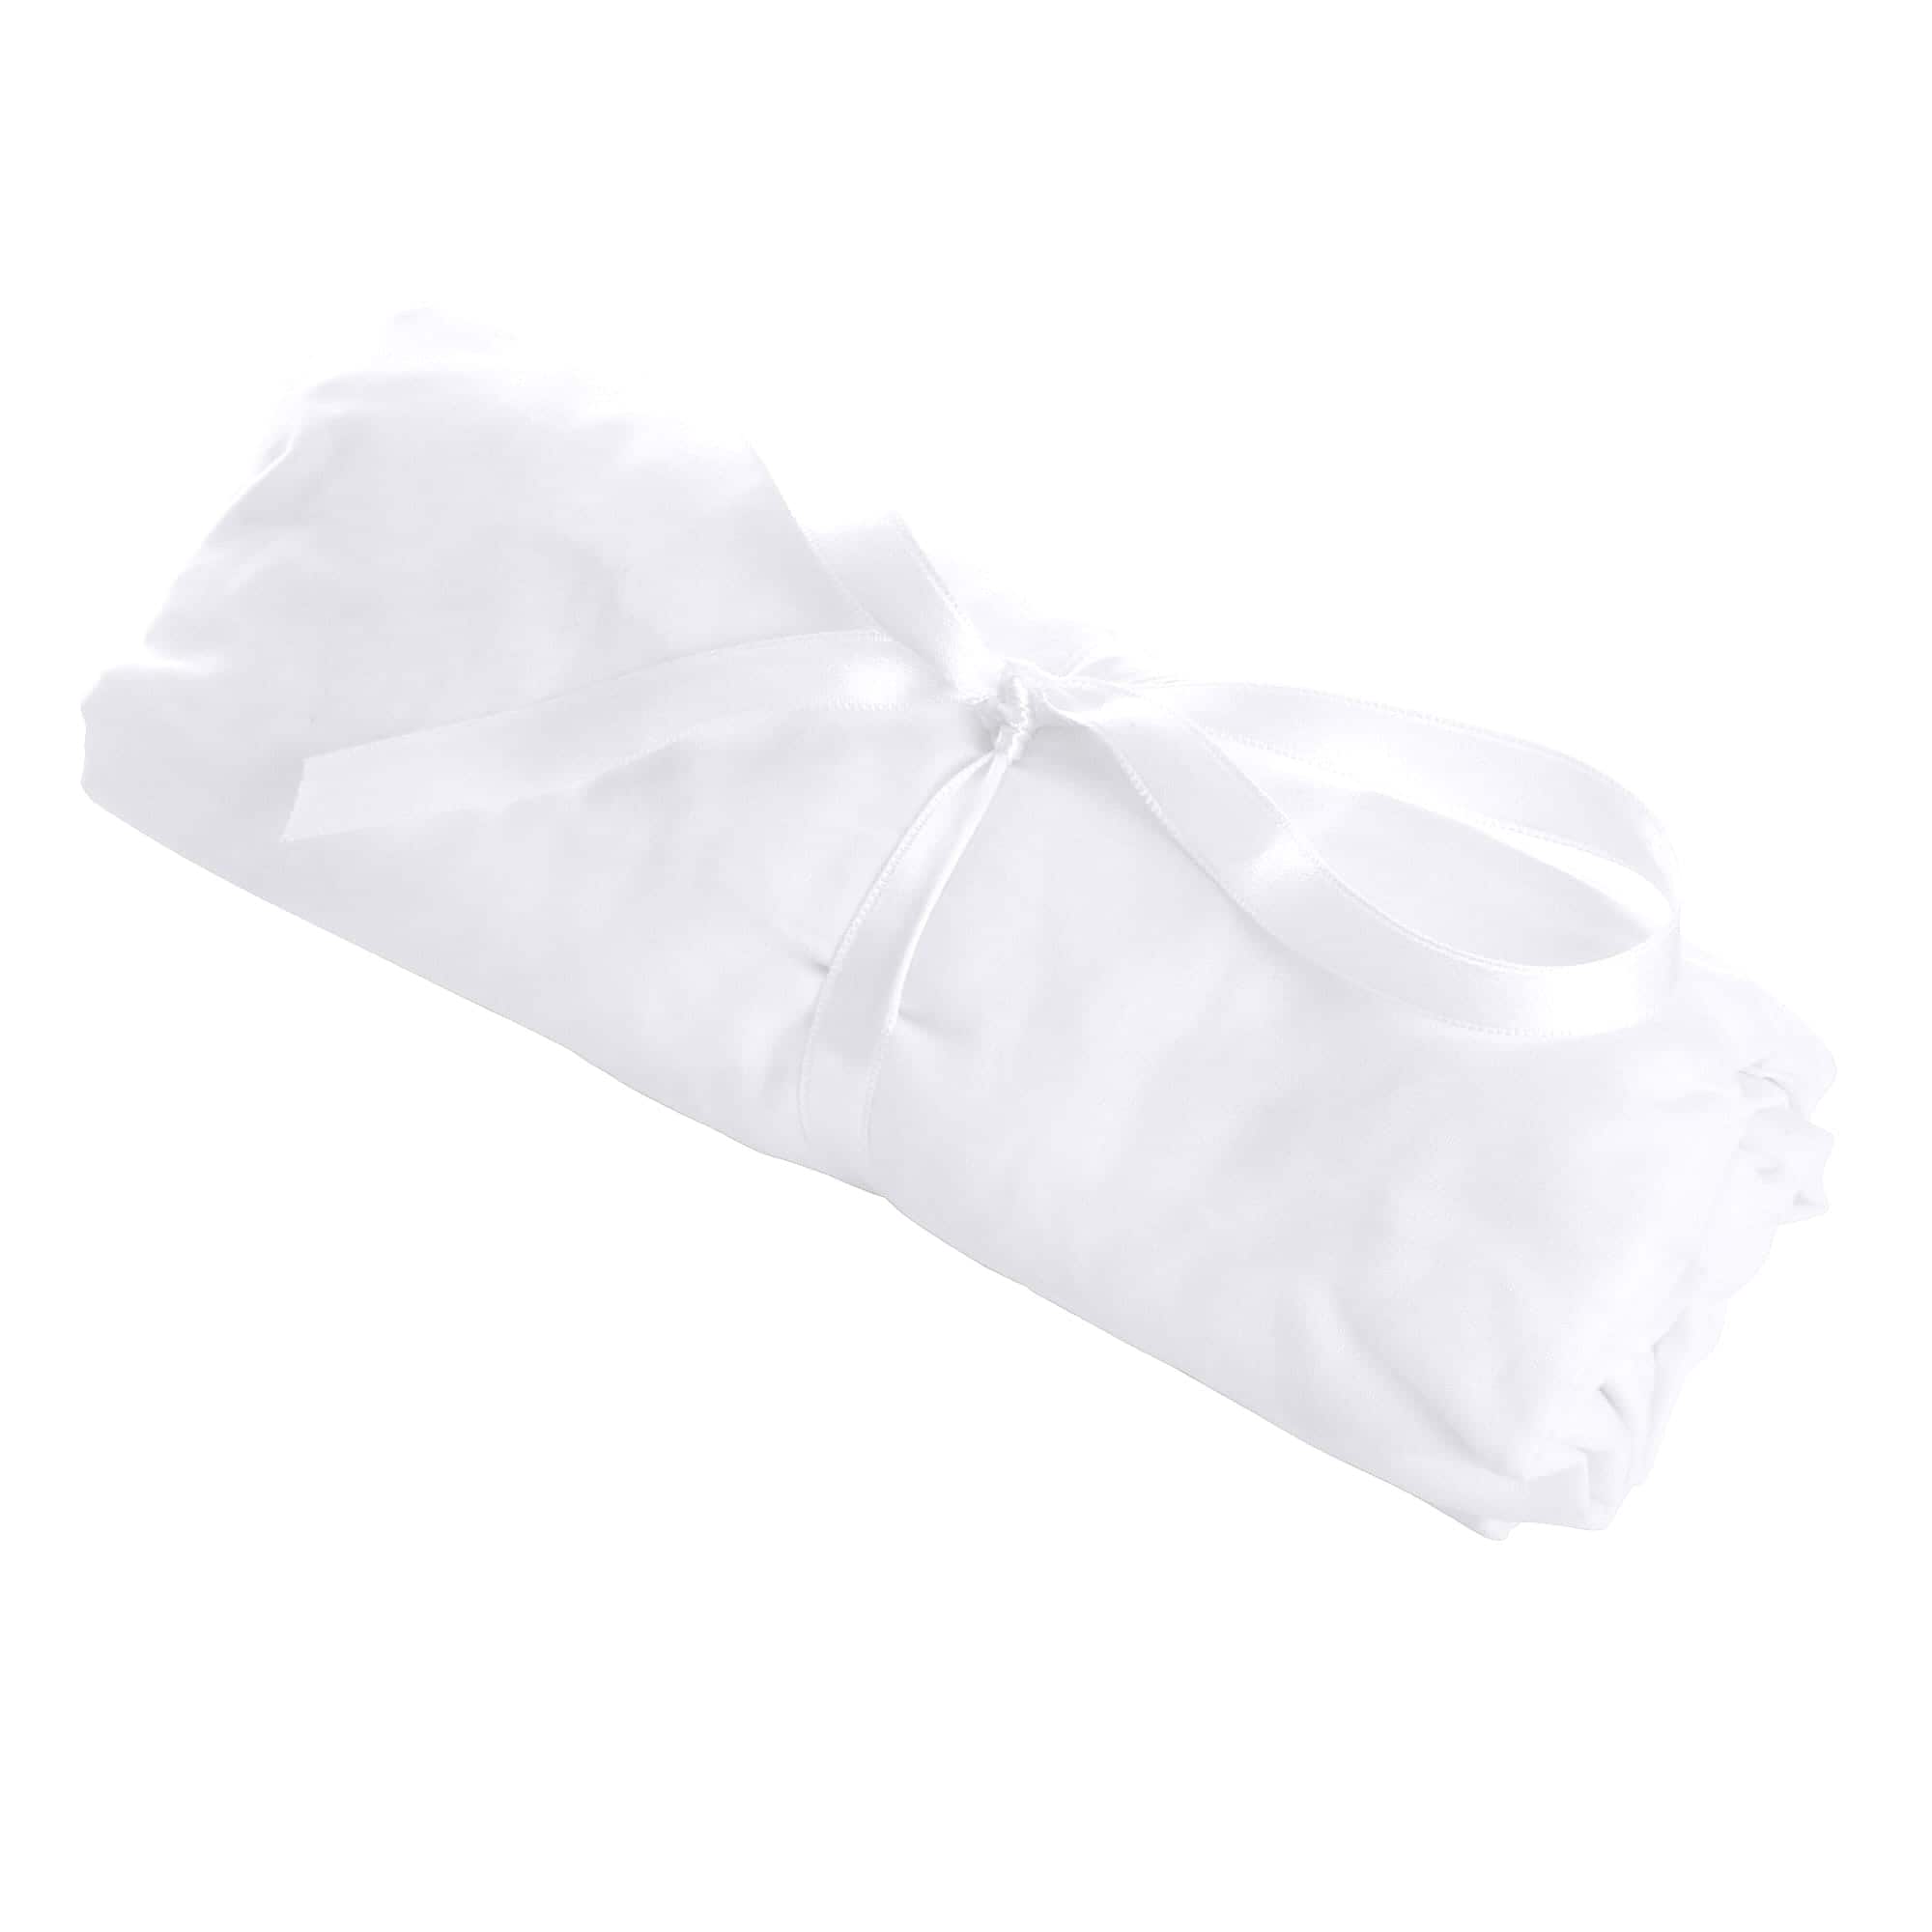 Theophile & Patachou Cot Bed Fitted Sheet 60x120cm - White